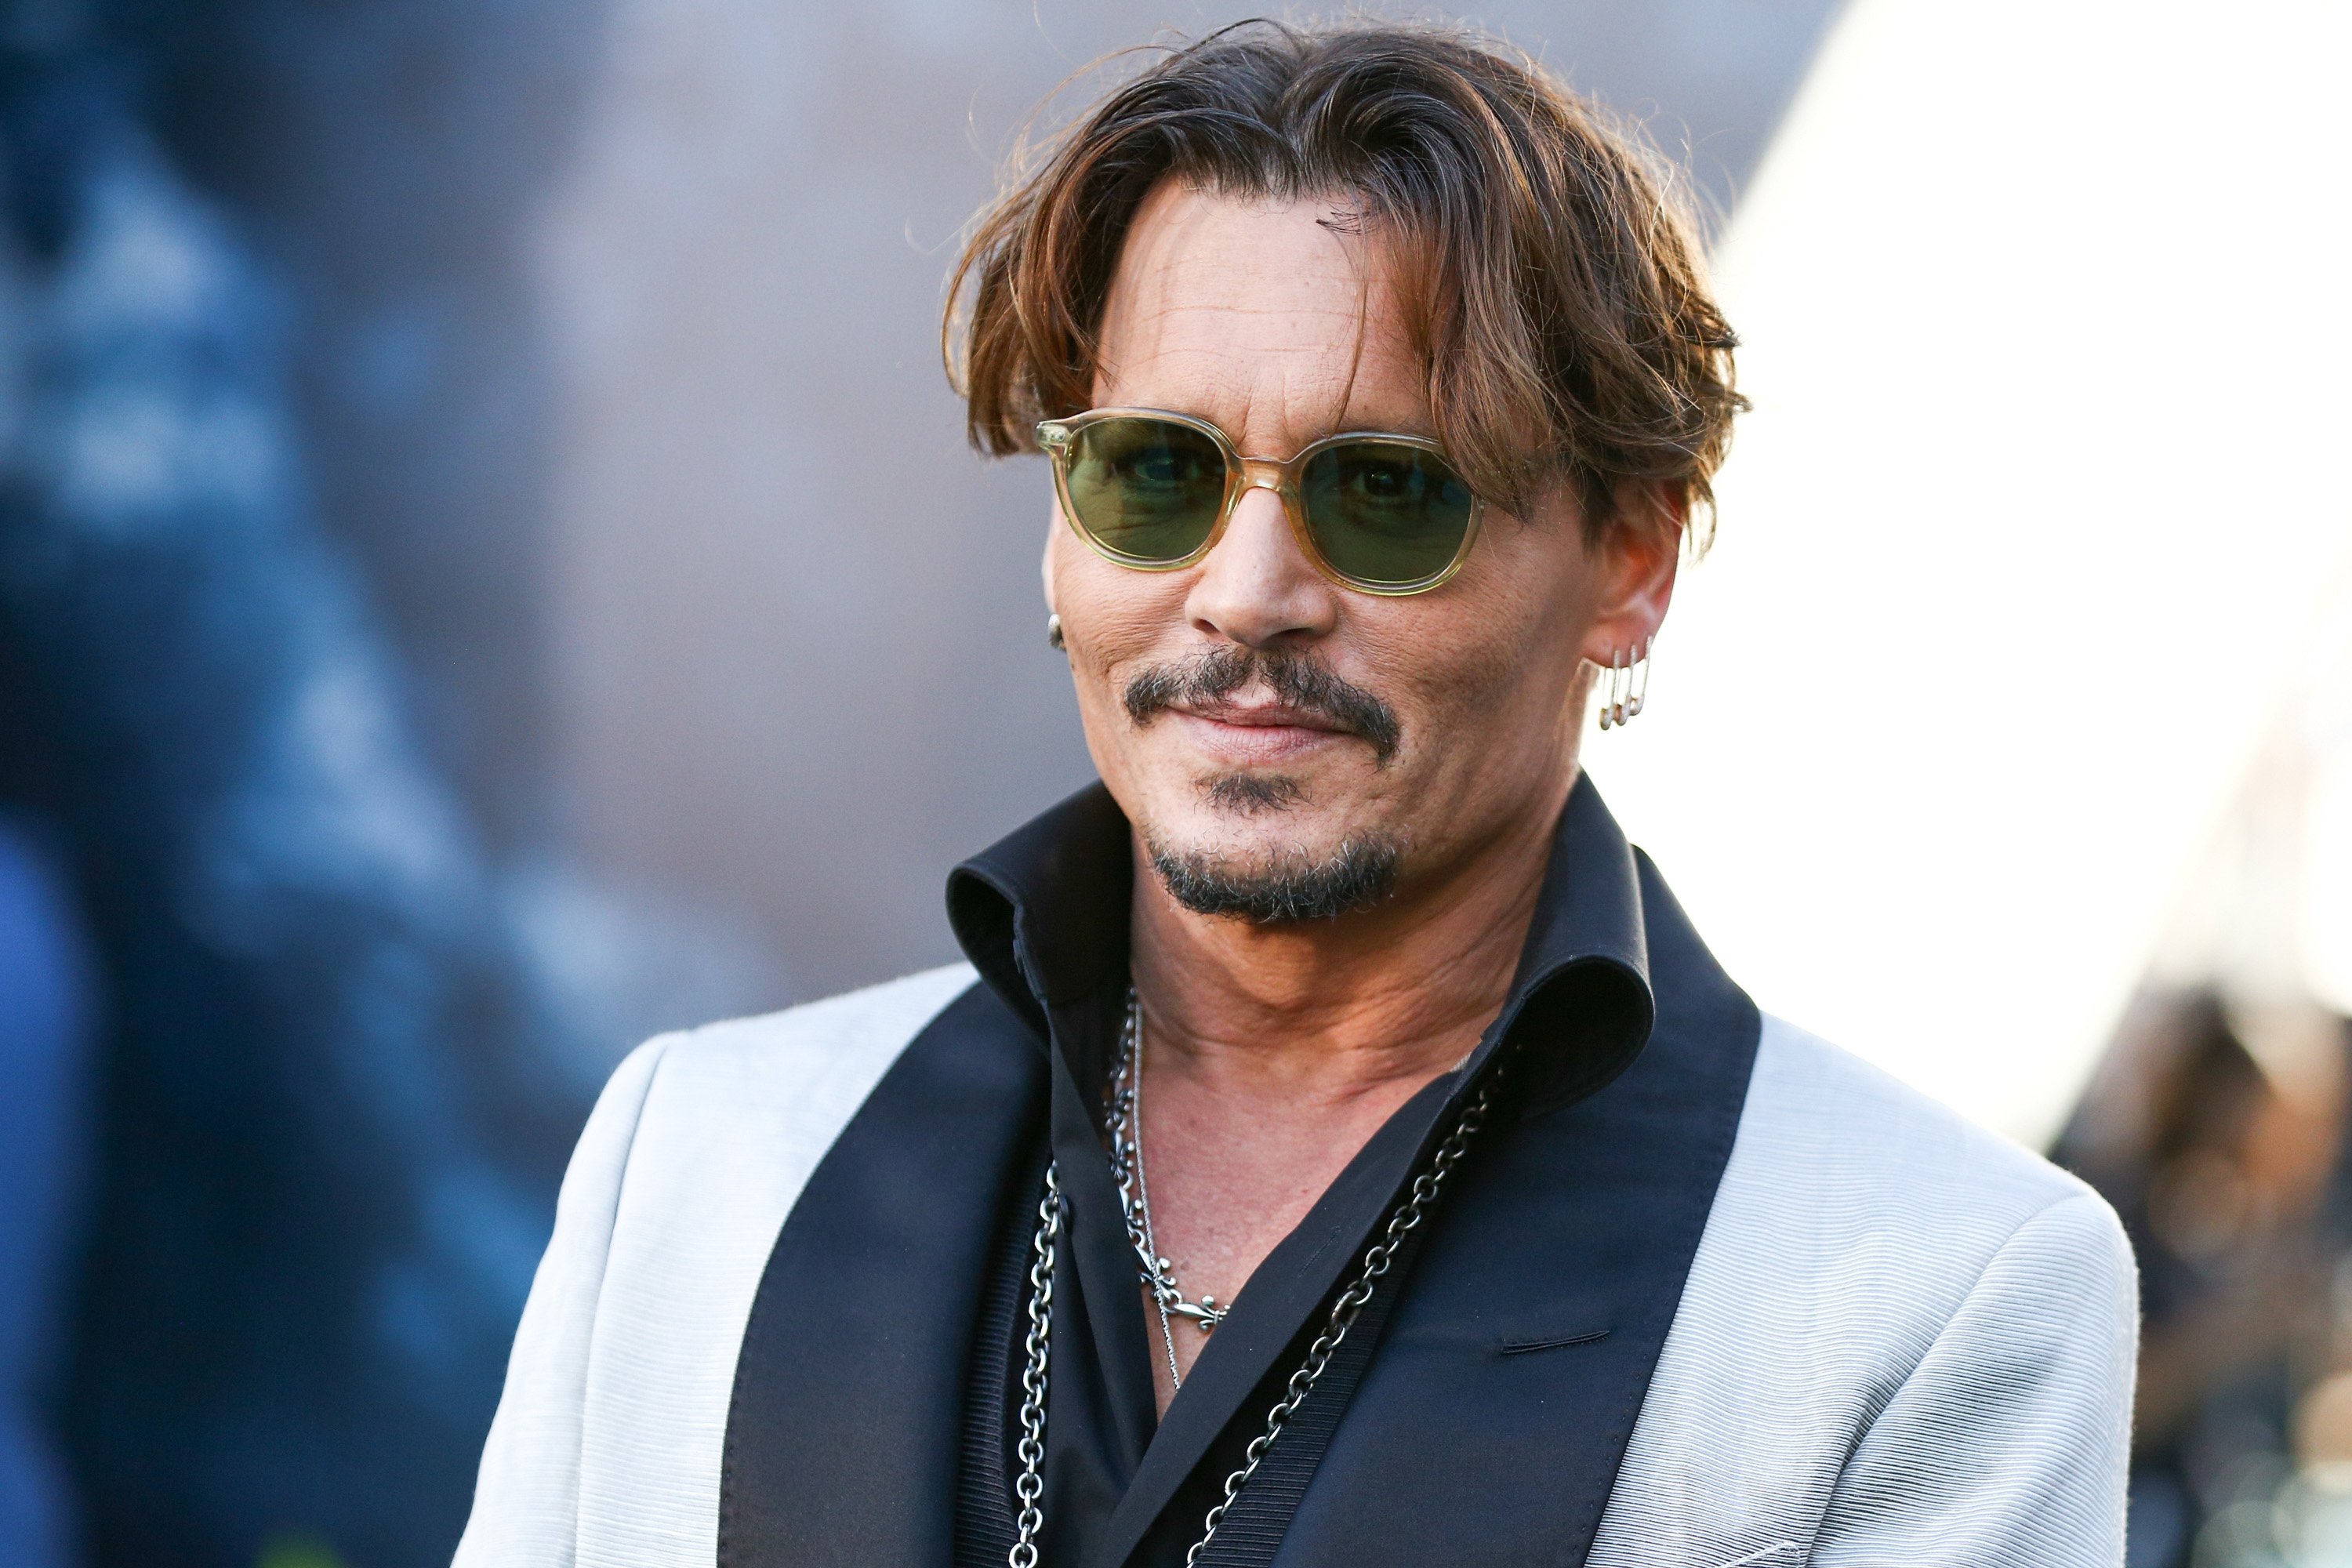 ohnny Depp attends the premiere of Disney's 'Pirates Of The Caribbean: Dead Men Tell No Tales' at Dolby Theatre on May 18, 2017 in Hollywood, California | Source: Getty Images